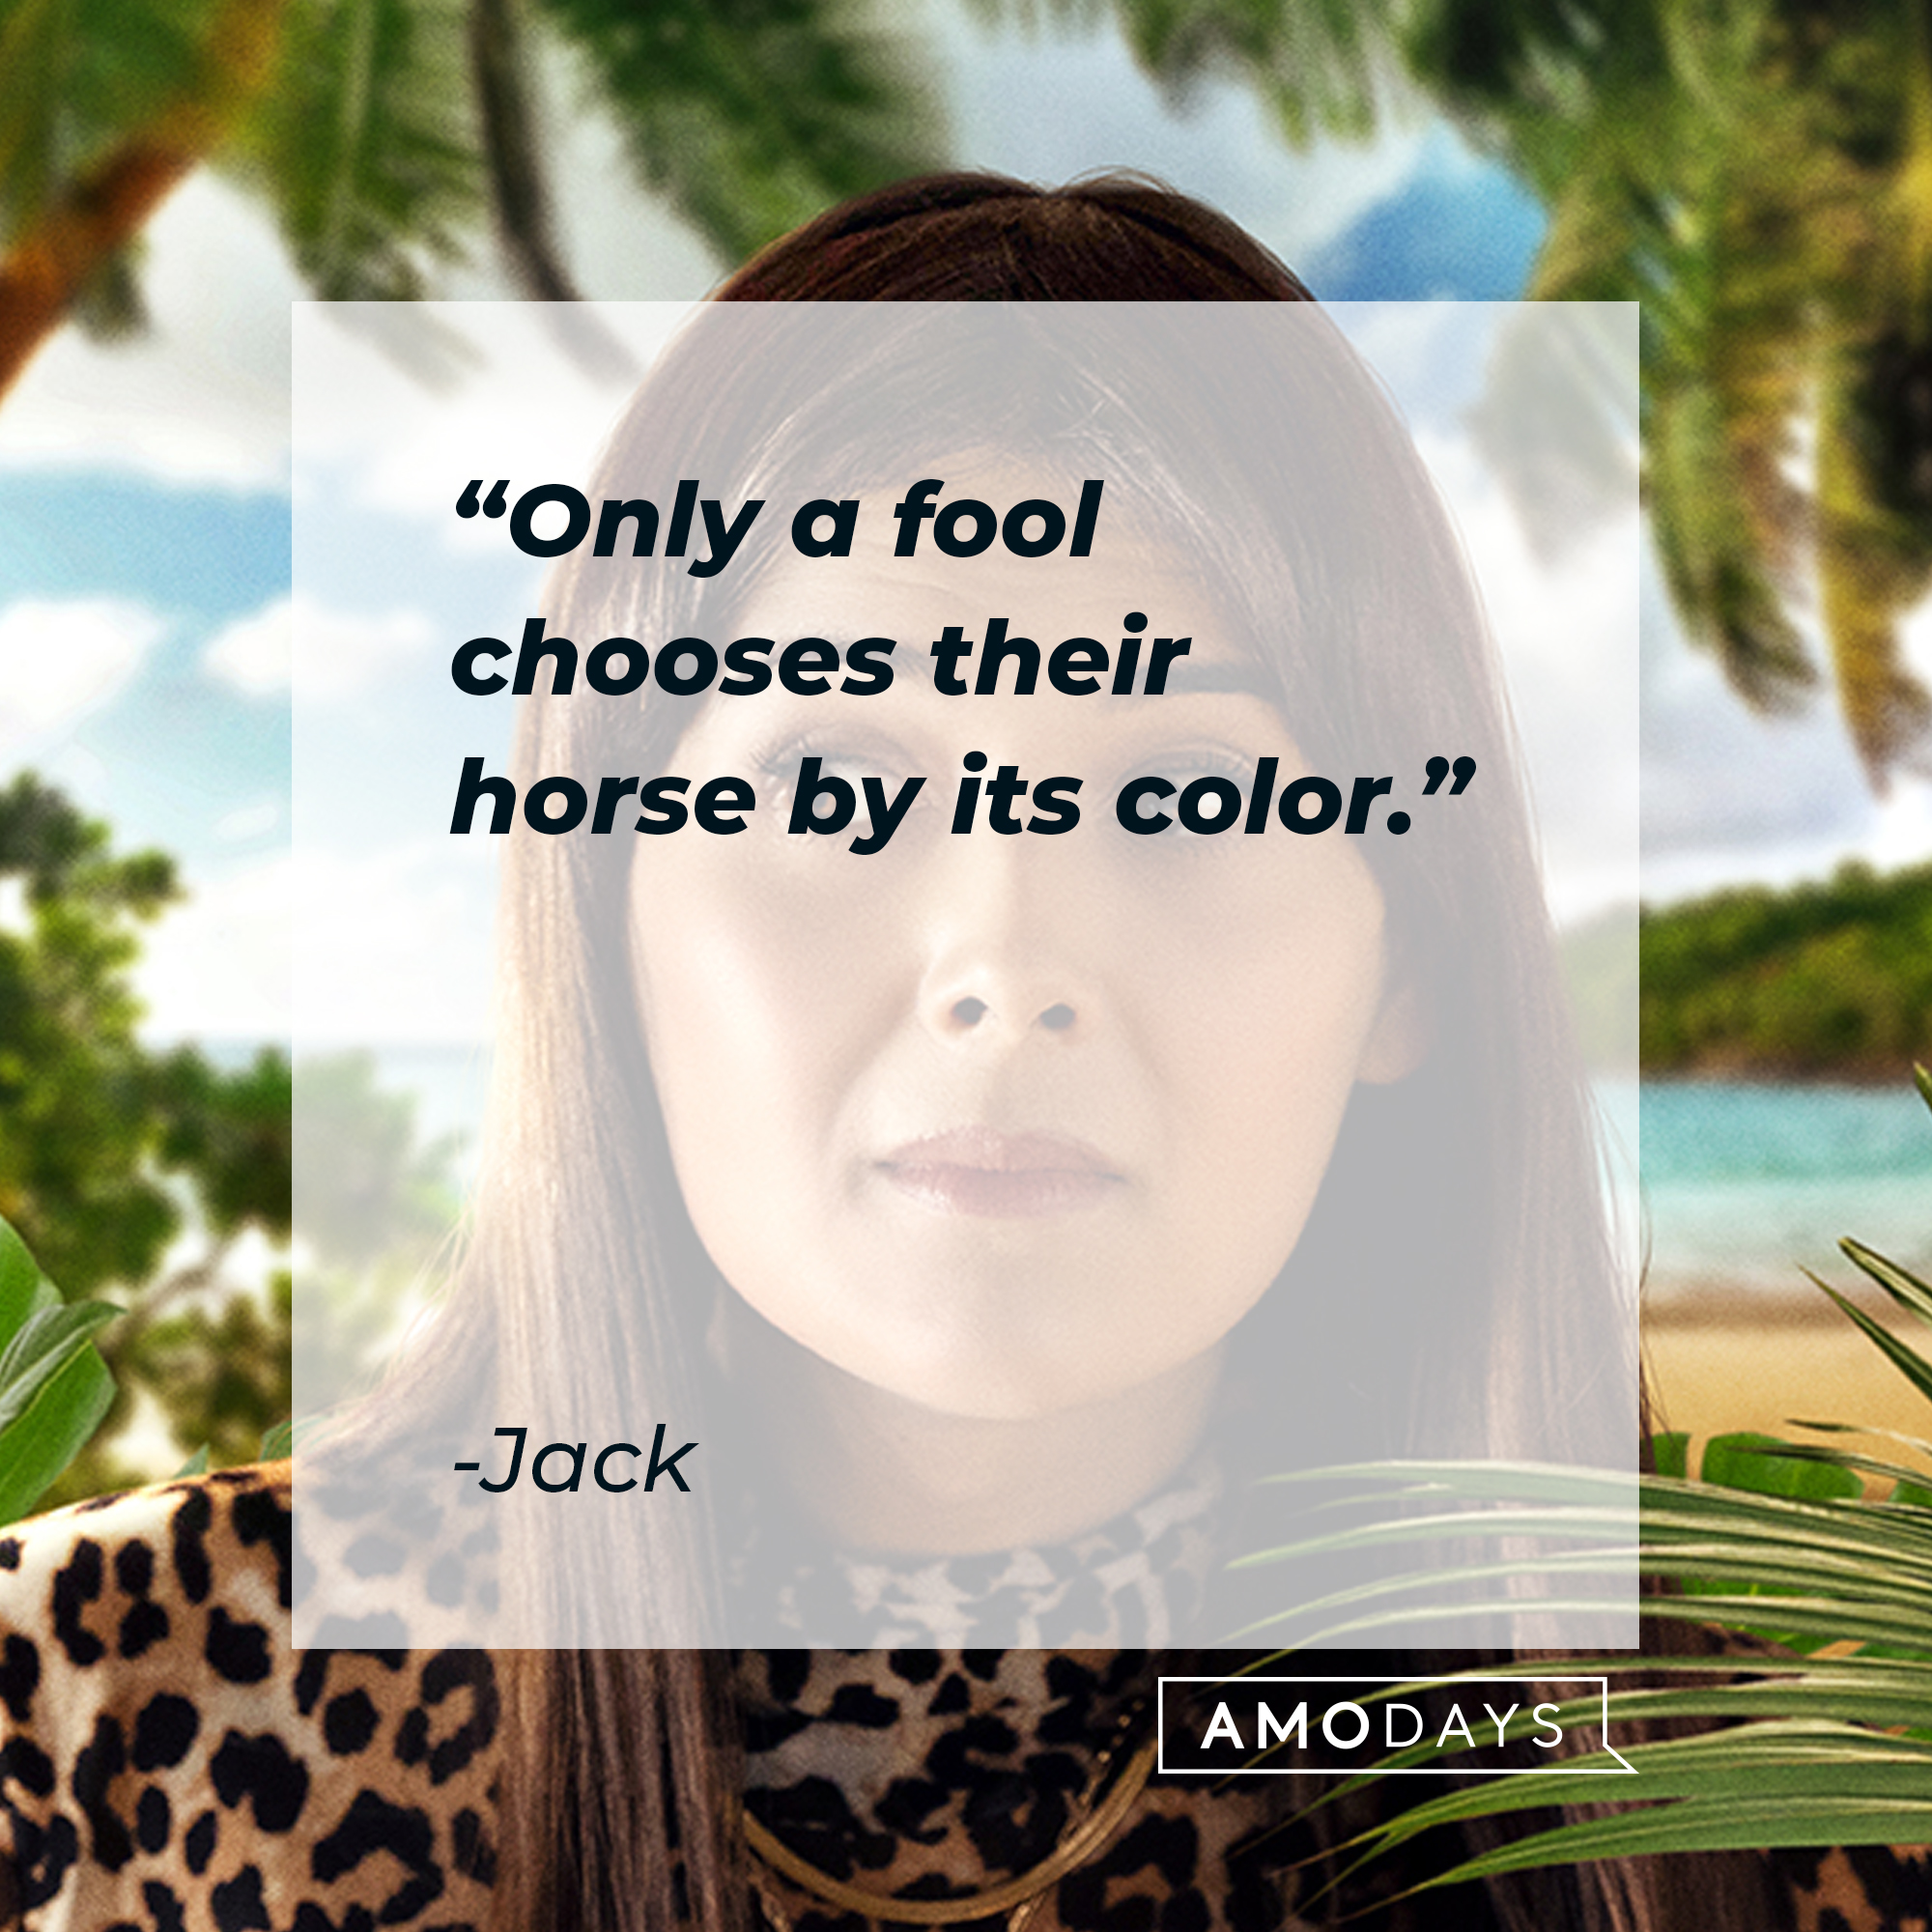 Jack with his quote: "Only a fool chooses their horse by its color." | Source: facebook.com/TheLostCityMovie